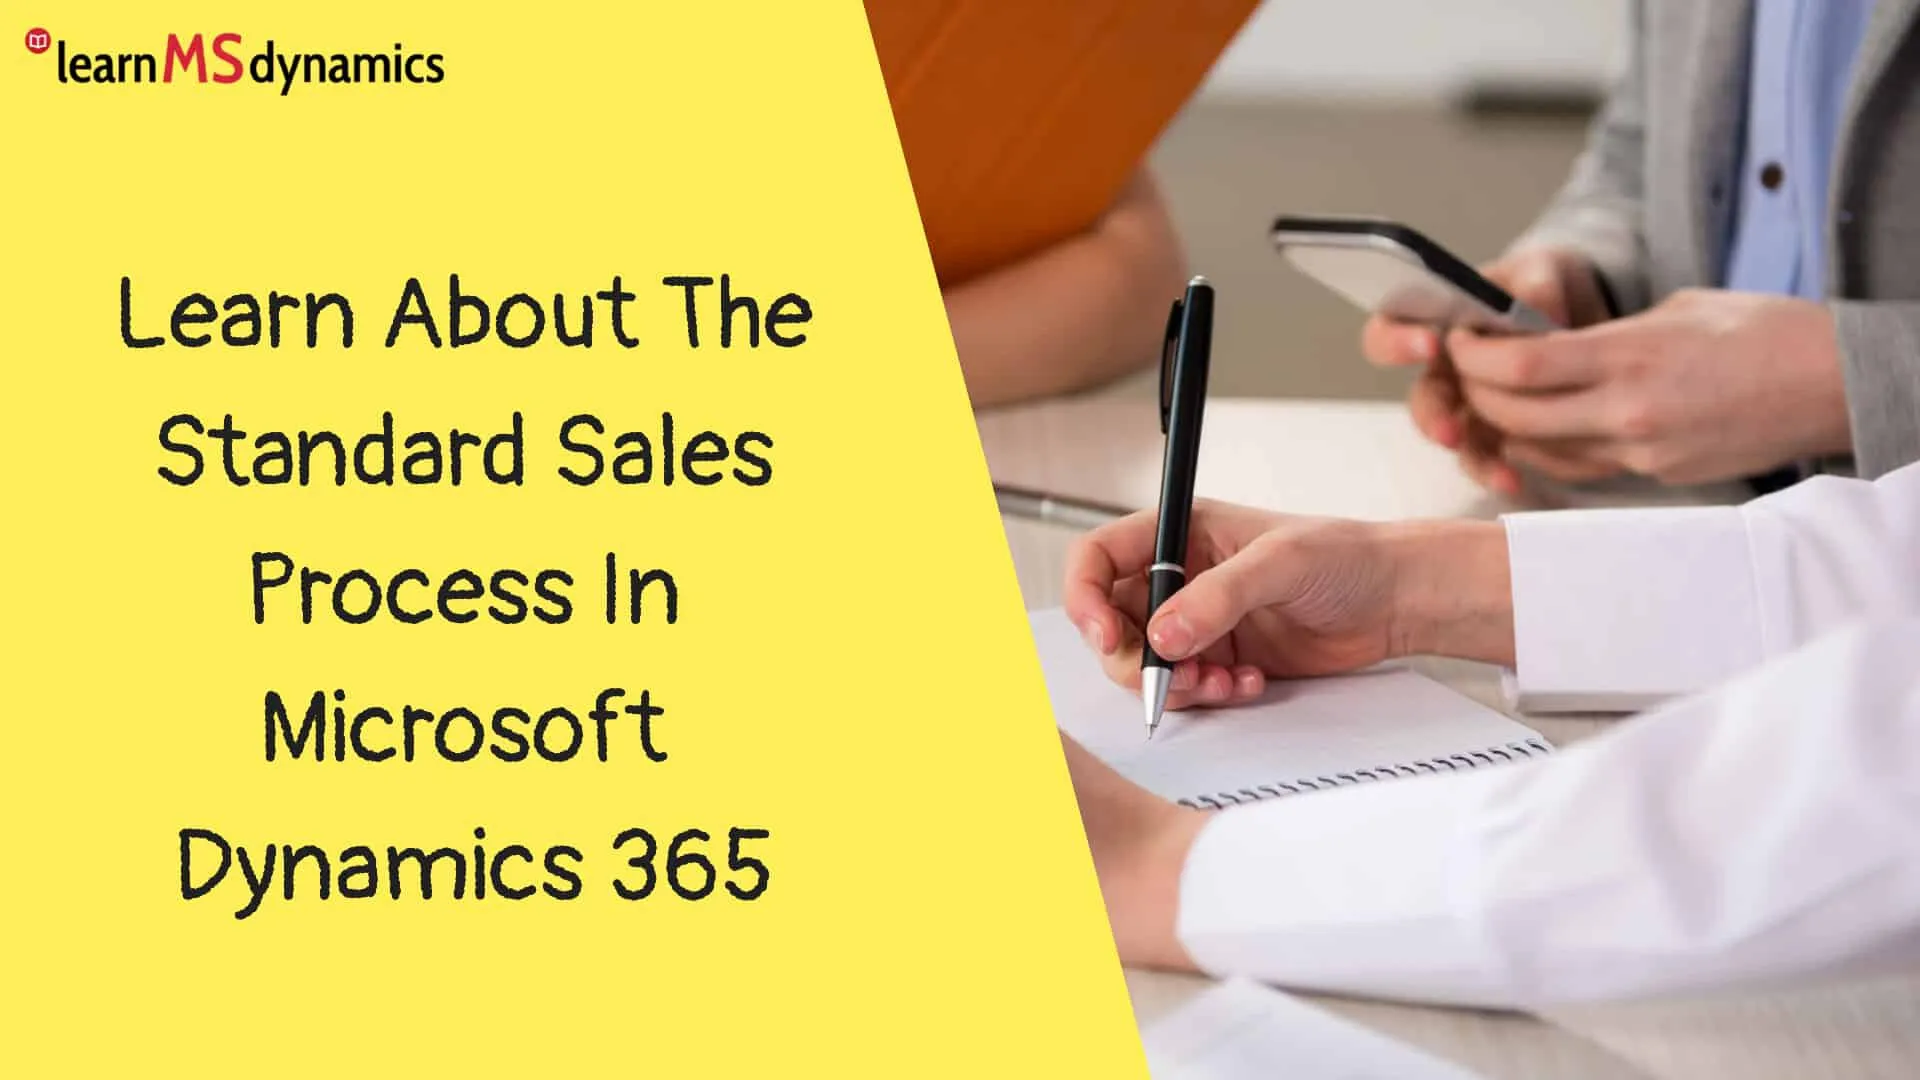 Learn About The Standard Sales Process In Microsoft Dynamics 365